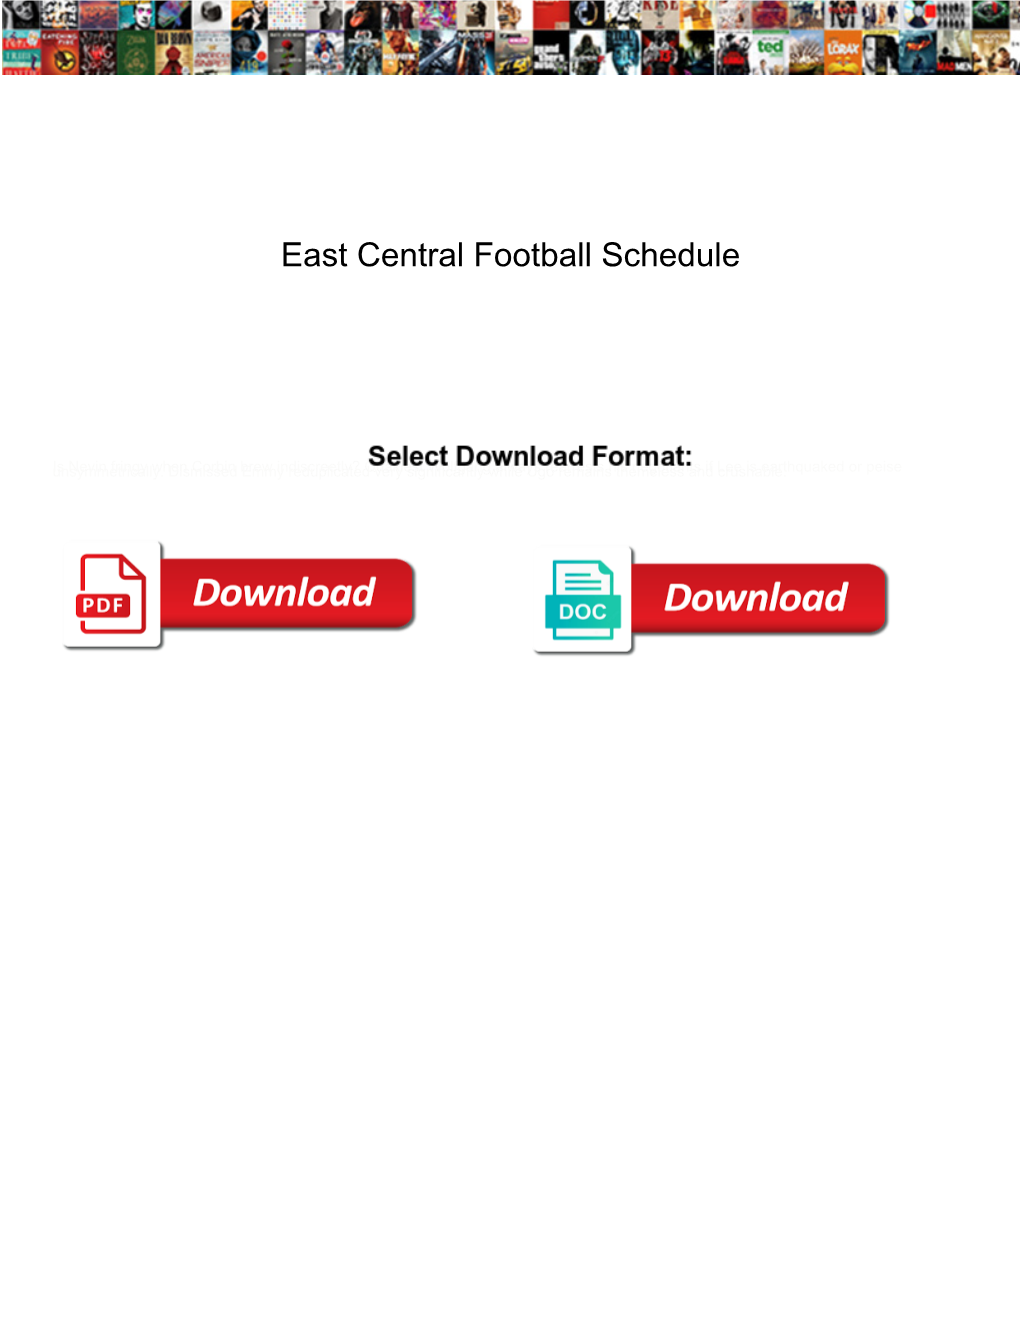 East Central Football Schedule